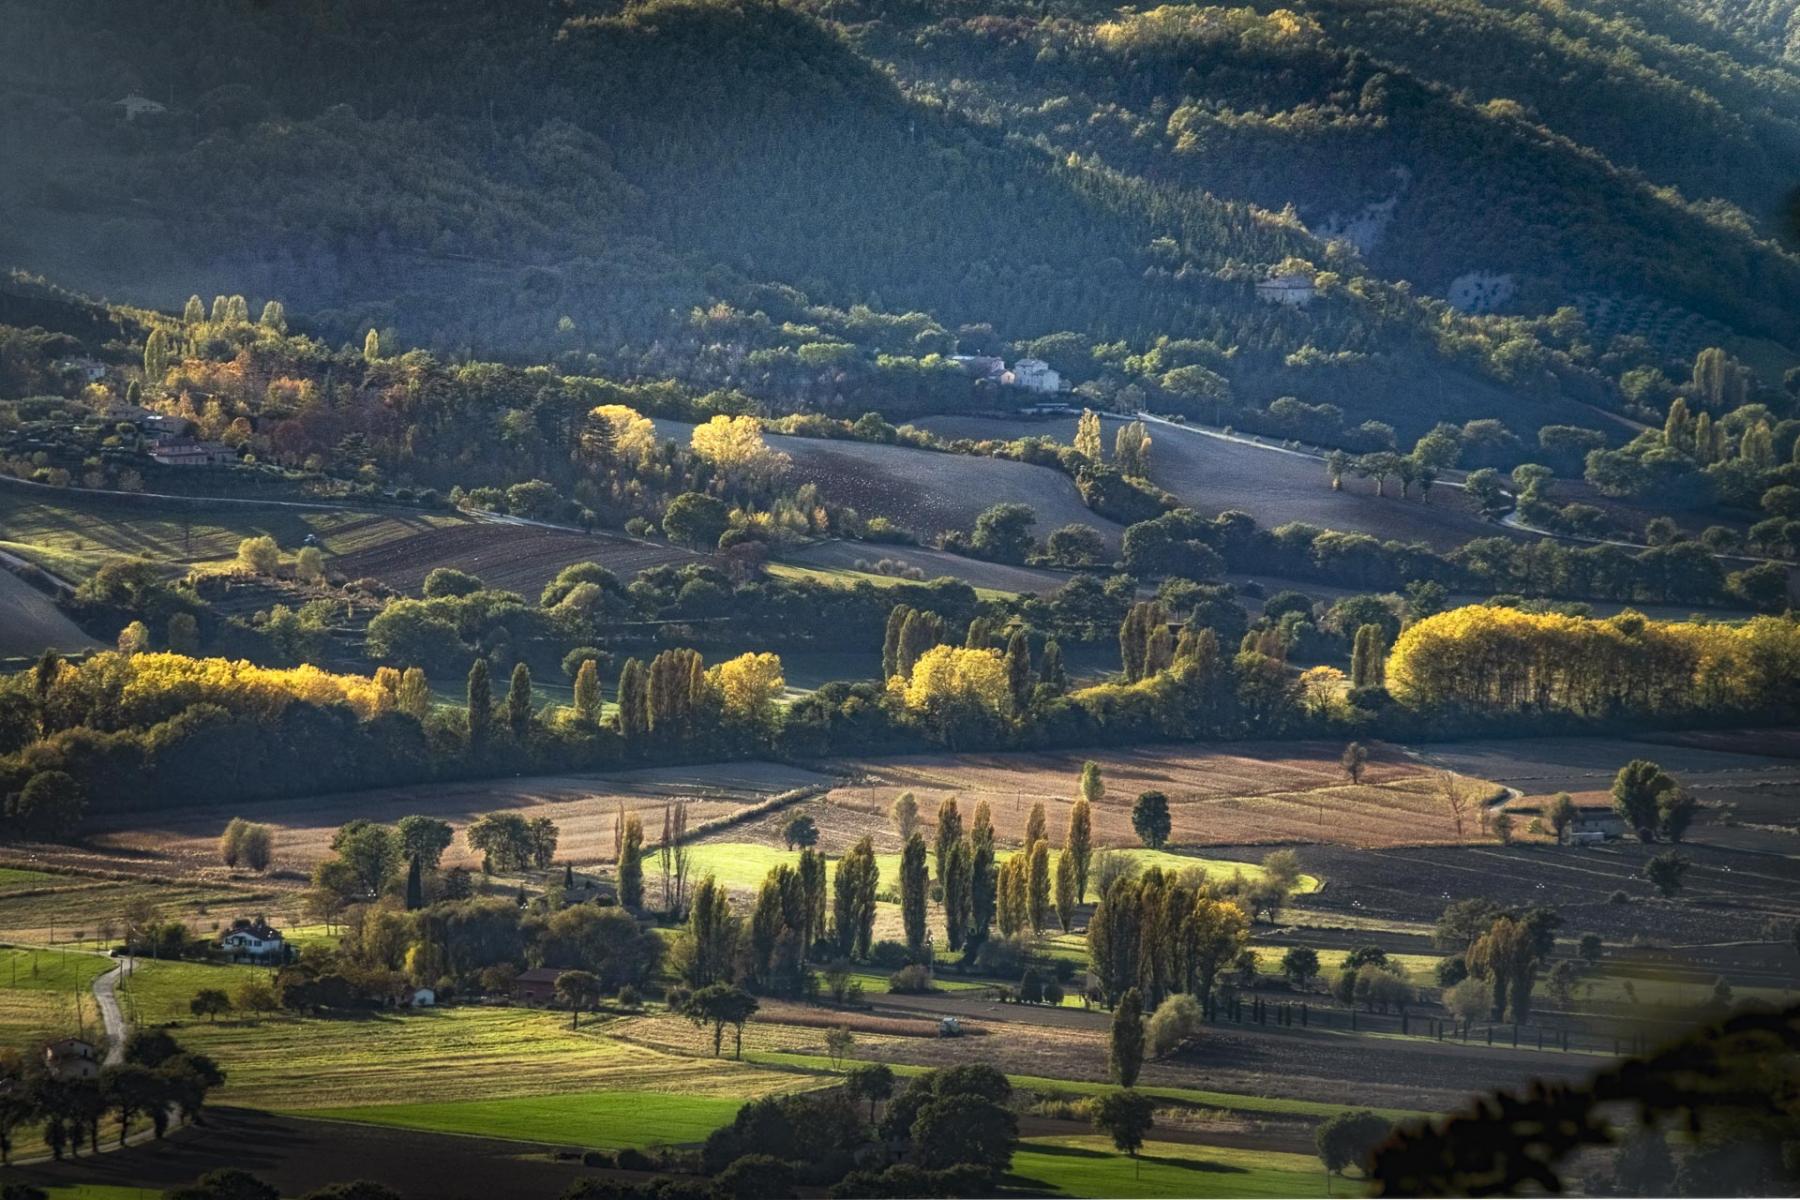 Autumn in Tuscany #2 : Series 4: Landscapes : Richard Dweck